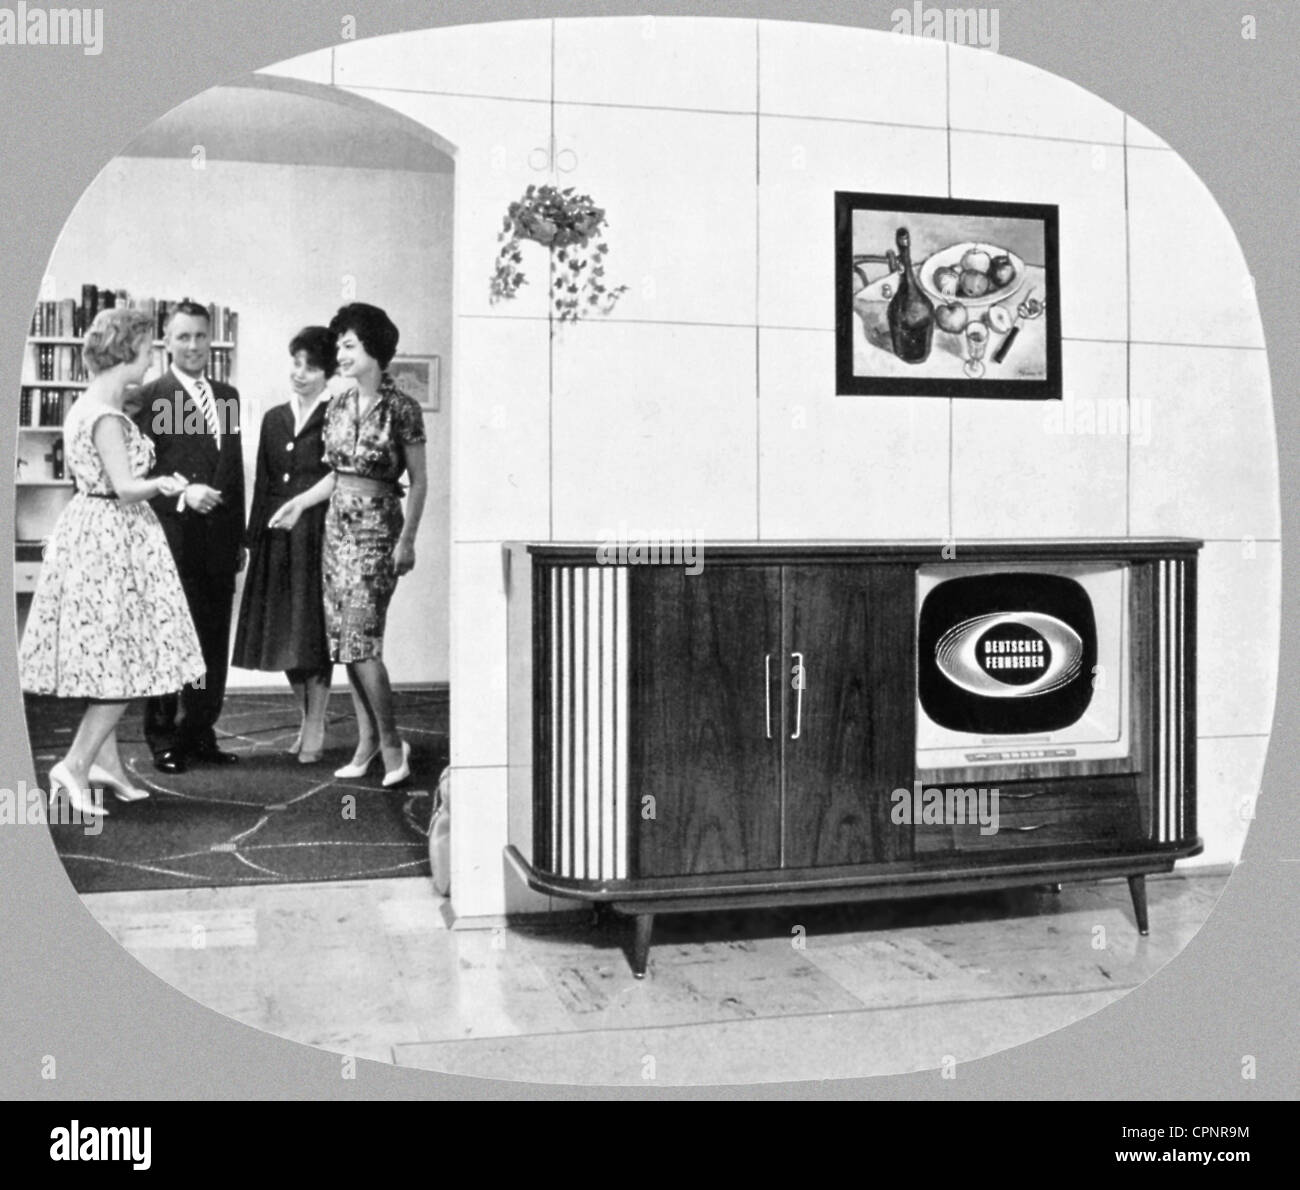 broadcast,television,advertising for Siemens radiogramophone FSTR 23,with integrated television set,expensive cabinet with walnut chassis,original price 1959: DM 2.450,logo: German television,Germany,1959,television console,television cabinet,console,flat,purchase,status symbol,status symbols,50s,TV history,television furniture,piece of furniture,pieces of furniture,interior furnishings,cabinet,chest,cabinets,chests,television set,TV,television sets,TV sets,TVs,TV set,tube television,tube systems,tubes-receiver,consumer electr,Additional-Rights-Clearences-Not Available Stock Photo